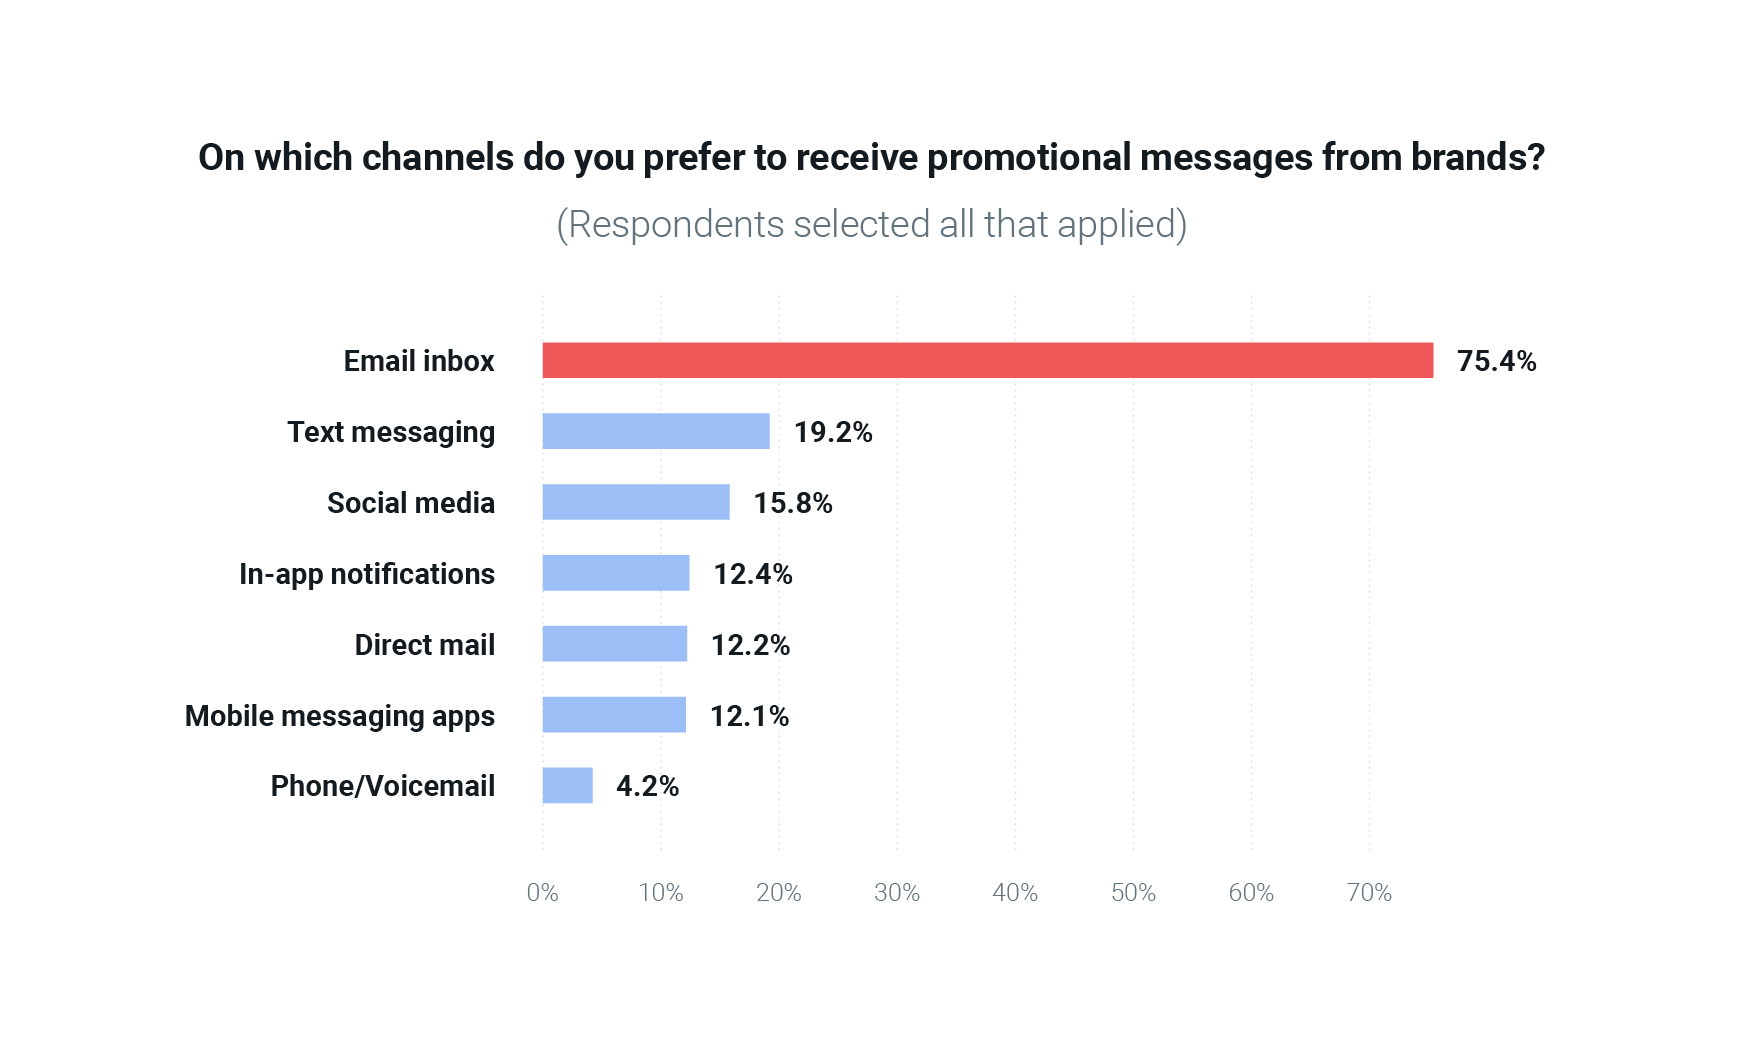 Chart on promotional message channel preferences